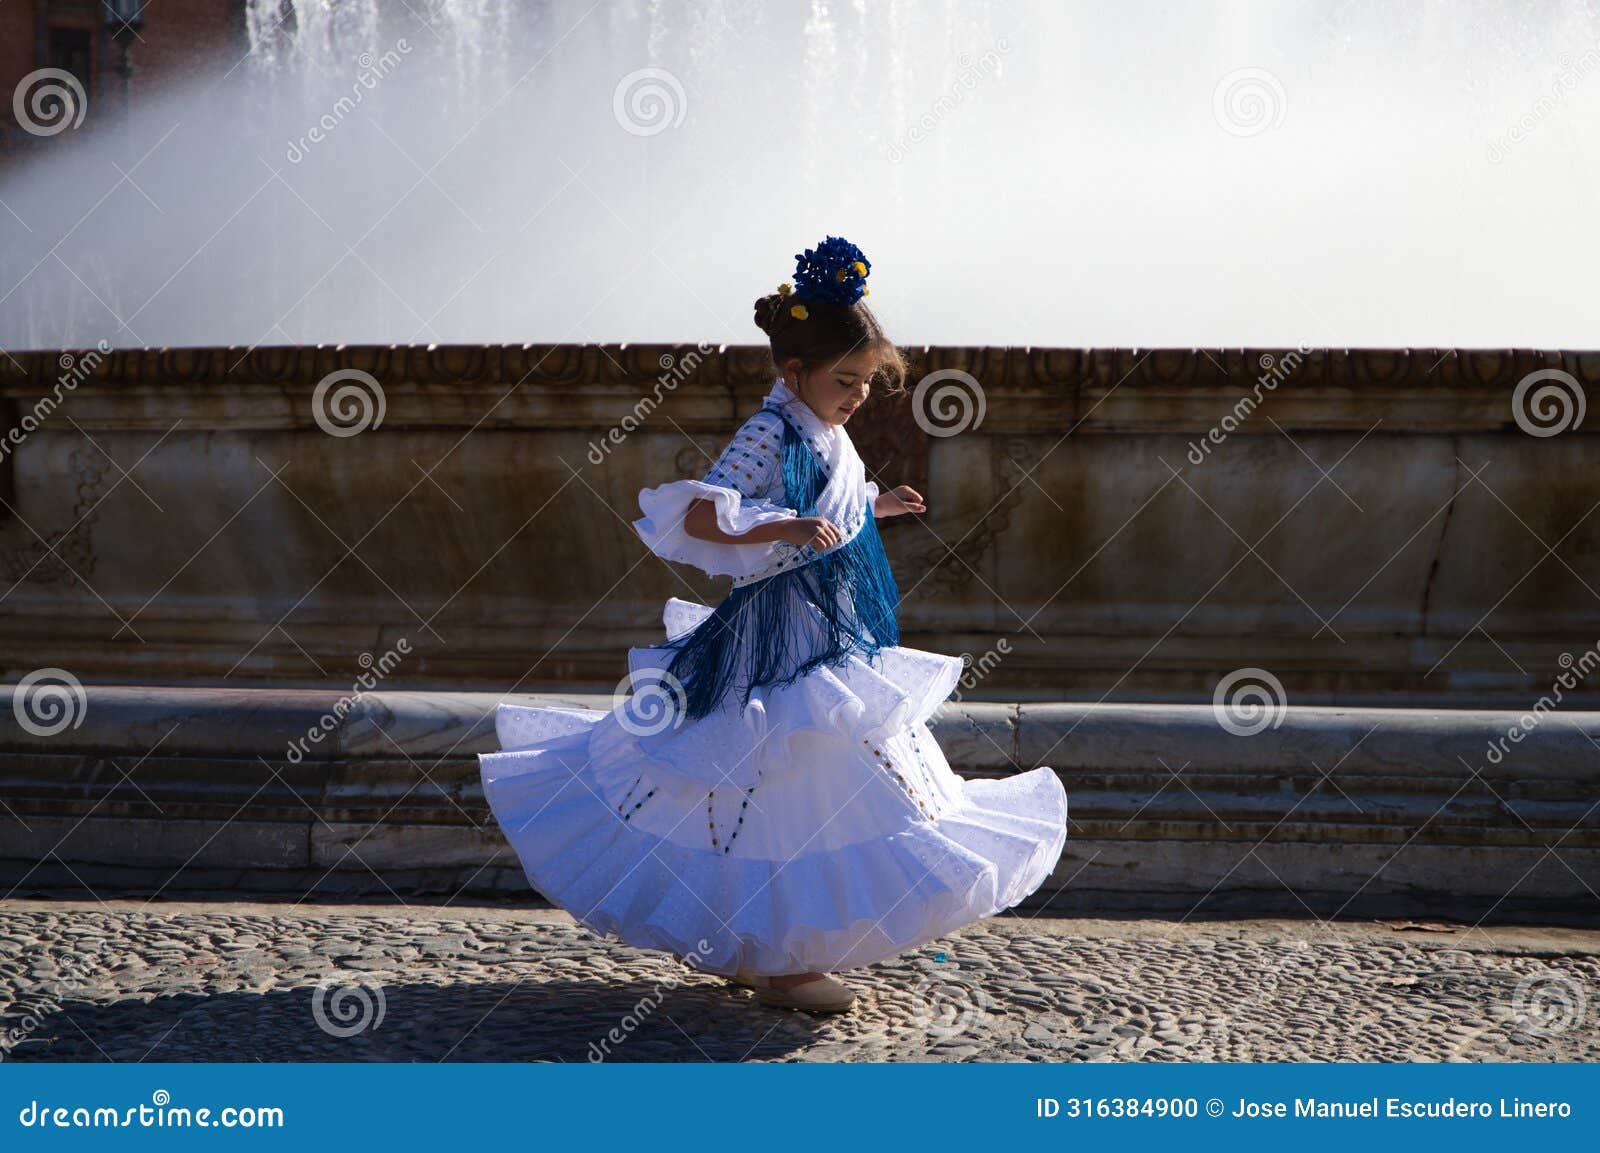 a pretty little girl dancing flamenco dressed in a white dress with ruffles and blue fringes in a famous square in seville, spain